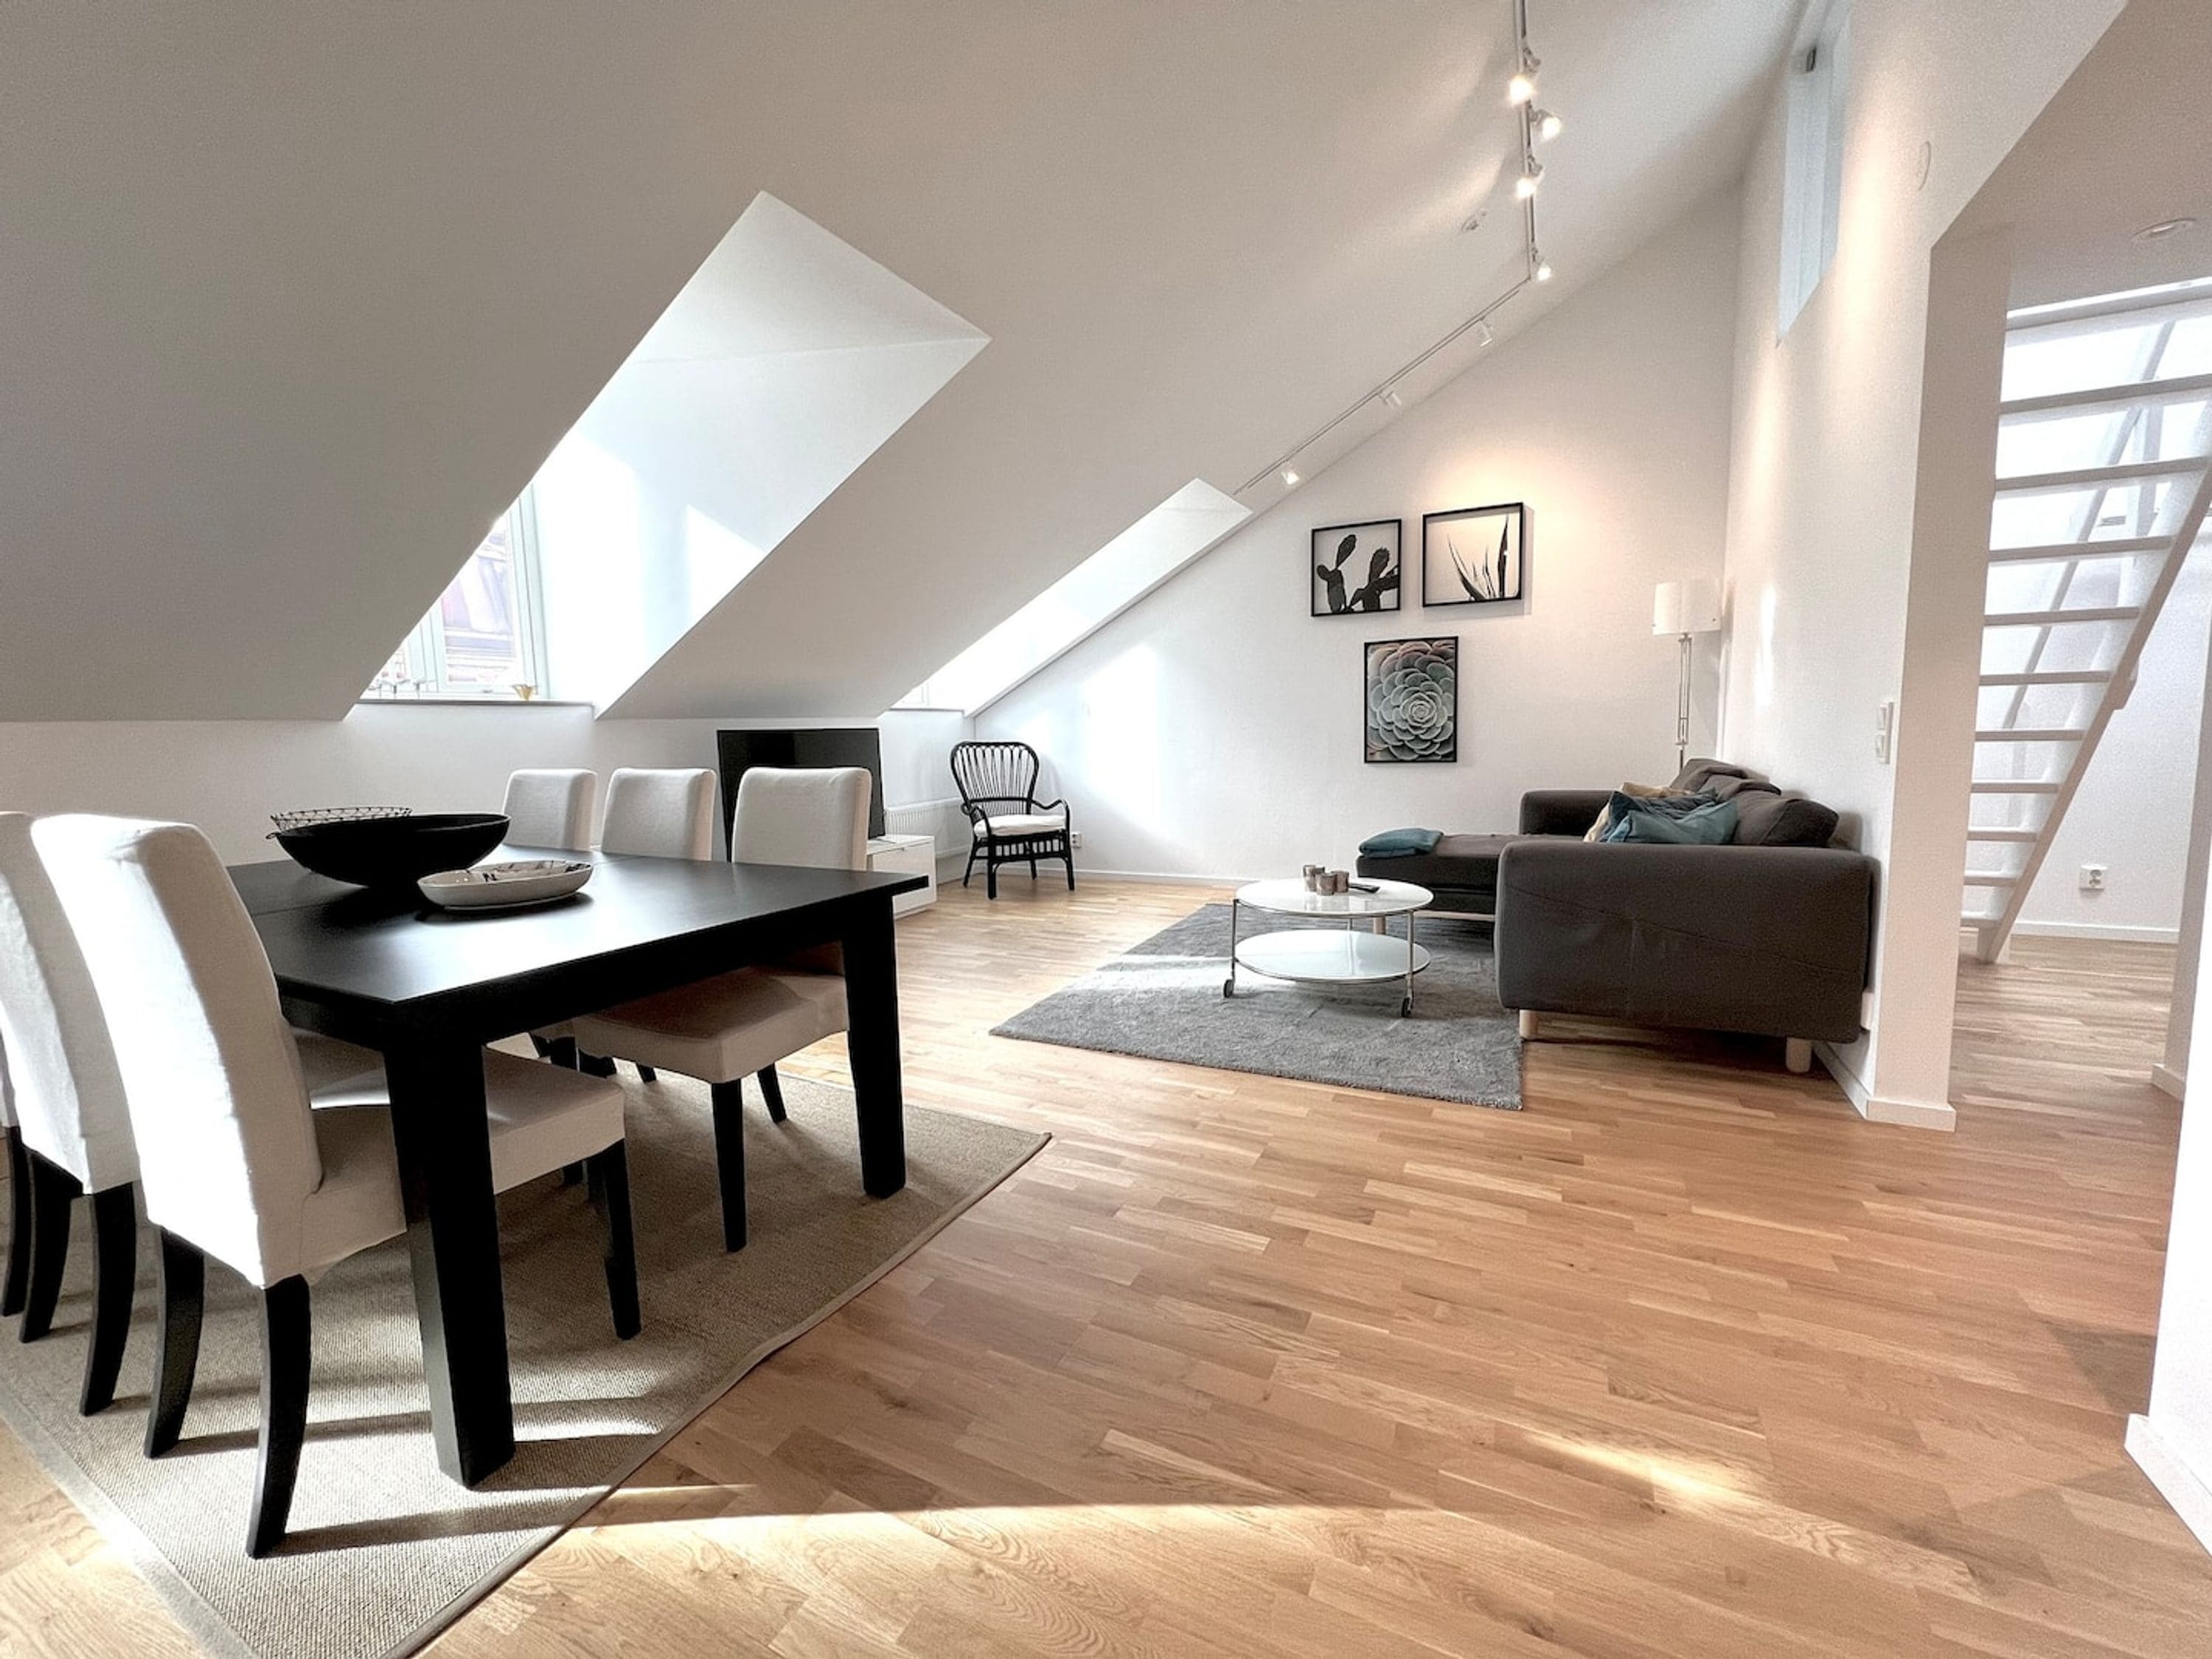 Property Image 1 - Elegant Apartment in the heart of the city